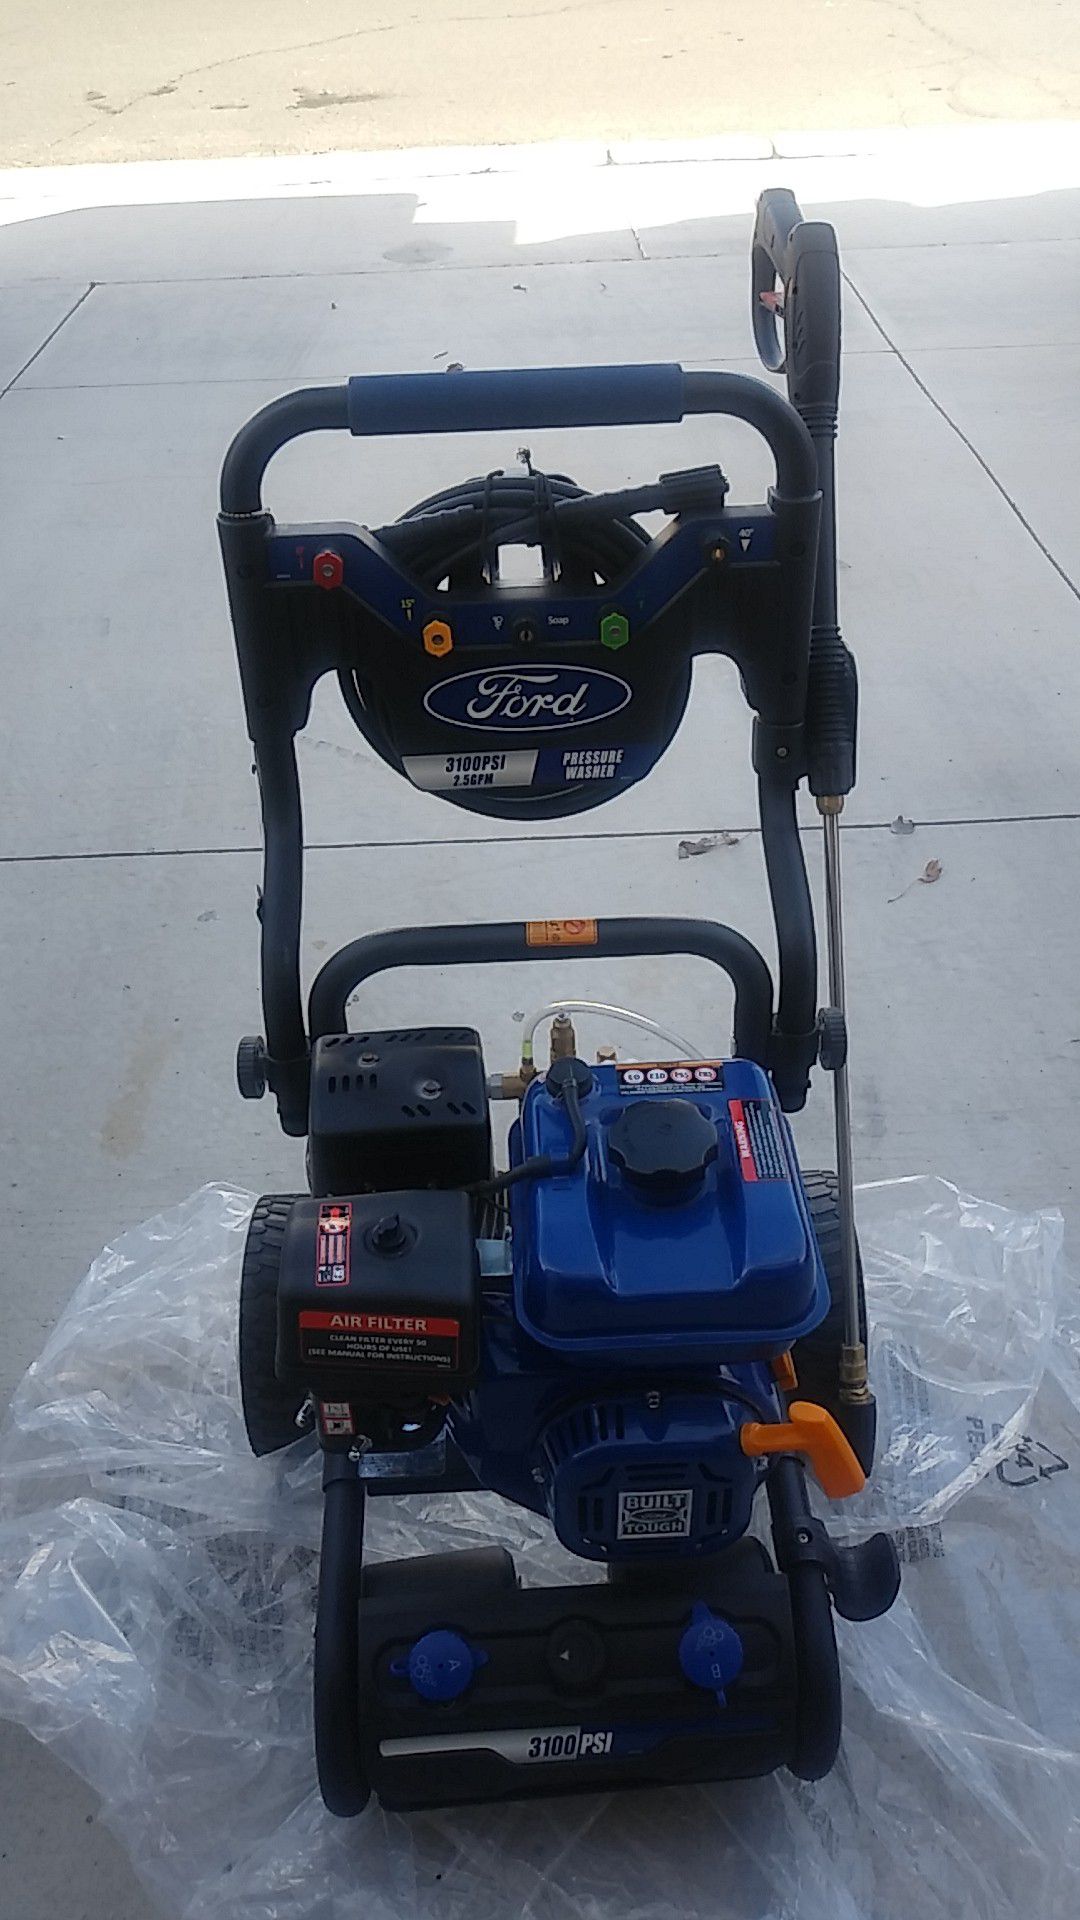 PRESSURE WASHER FORD 3100 PSI Gas use couple times runs great with turbo nozze comes with gun hose and 6 pressure tips check my other offers